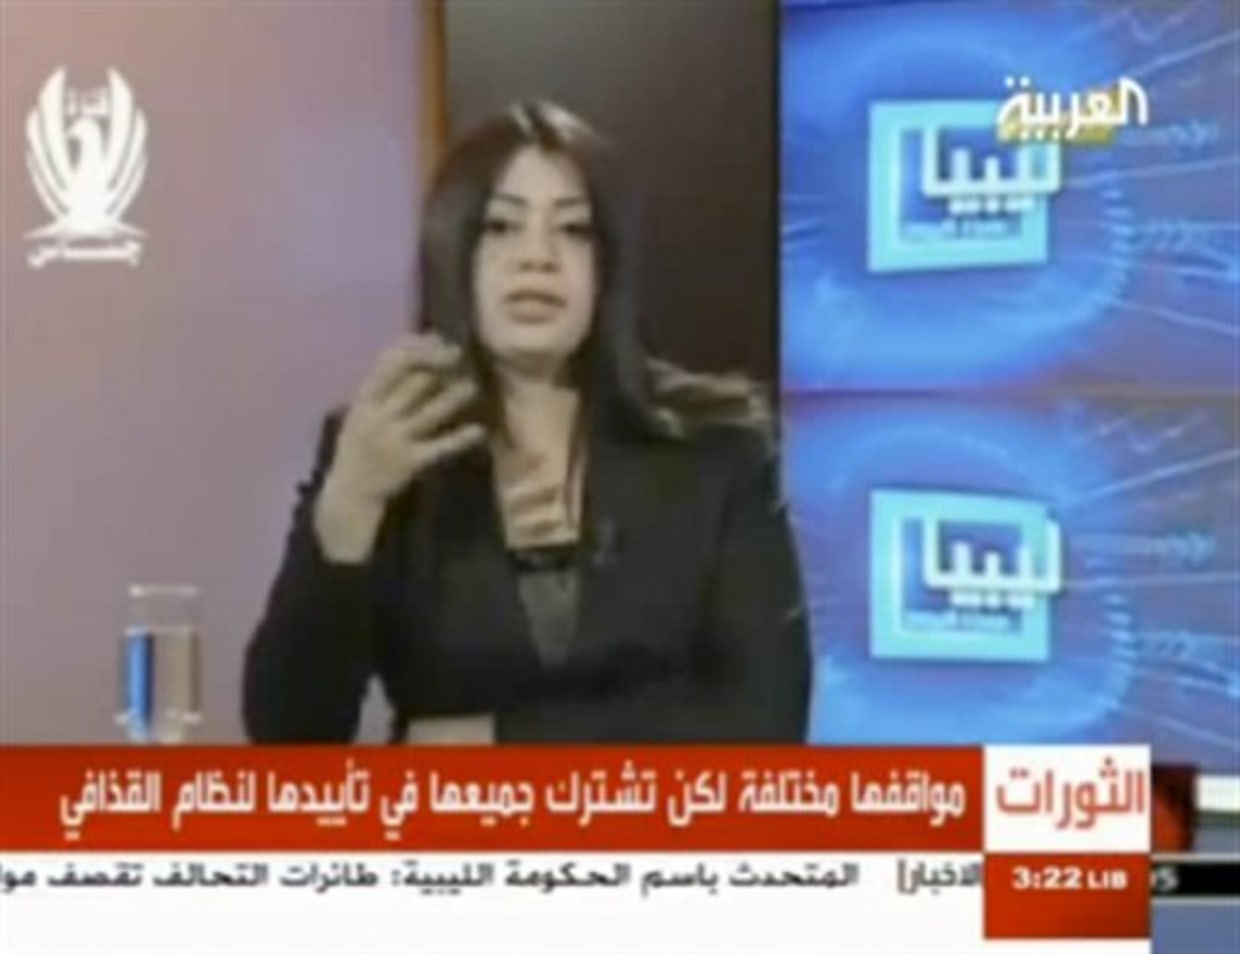 Libya One TV on X: Just posted a photo  / X